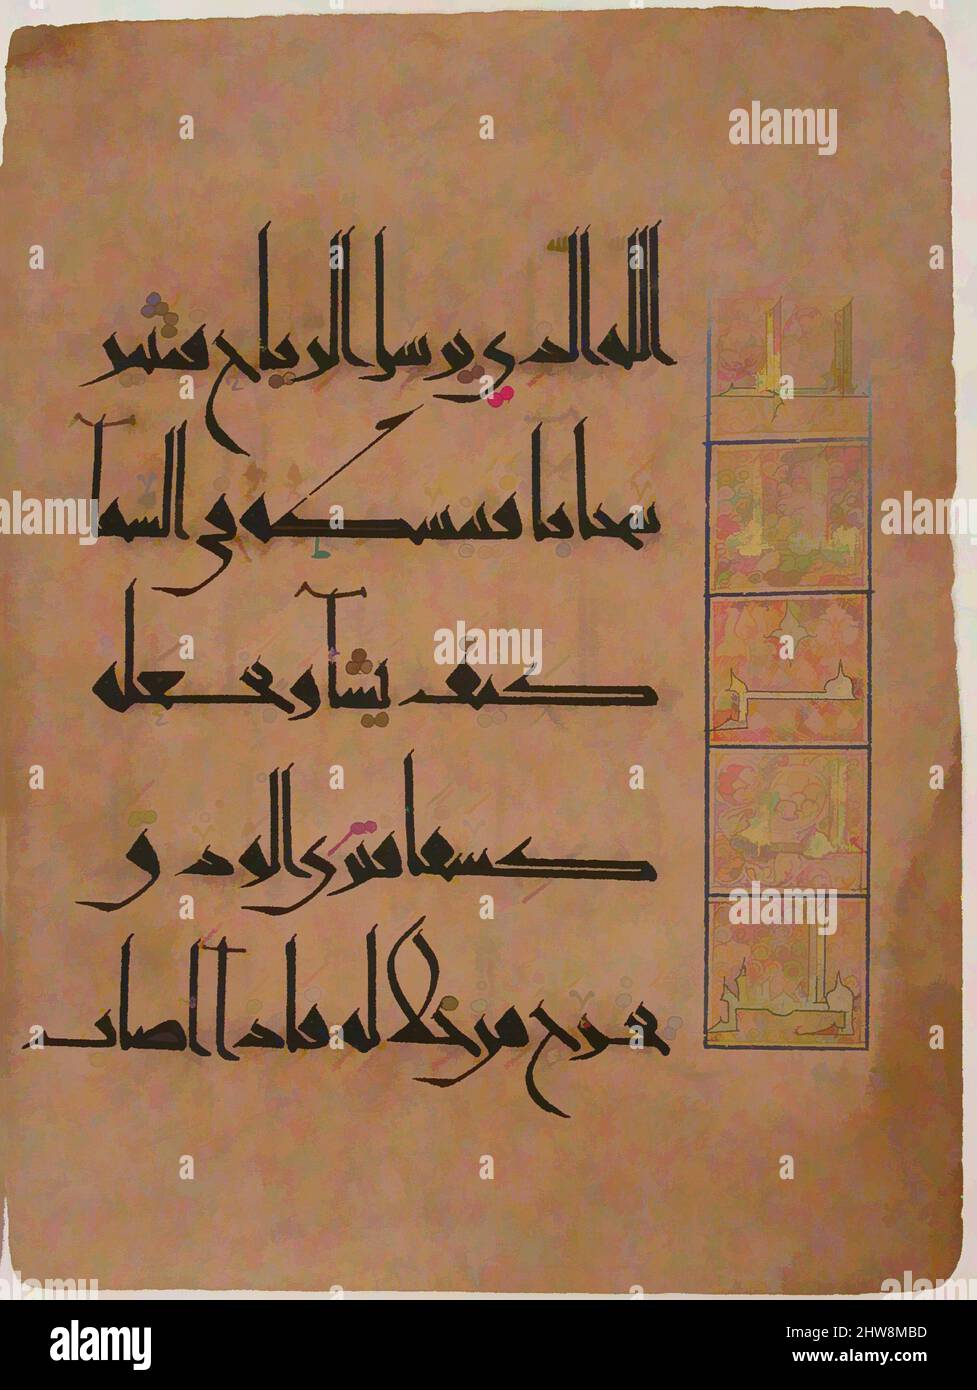 Art inspired by Folio from a Qur'an Manuscript, dated A.H. 485/A.D. 1092, Attributed to Iran or Afghanistan, Ink, opaque watercolor, and gold on paper, 10 1/2 x 7 7/8 in. (26.7 x 20 cm), Codices, This page almost certainly comes from a dispersed Qur'an dated A.H. 485/A.D. 1092 in 'new, Classic works modernized by Artotop with a splash of modernity. Shapes, color and value, eye-catching visual impact on art. Emotions through freedom of artworks in a contemporary way. A timeless message pursuing a wildly creative new direction. Artists turning to the digital medium and creating the Artotop NFT Stock Photo